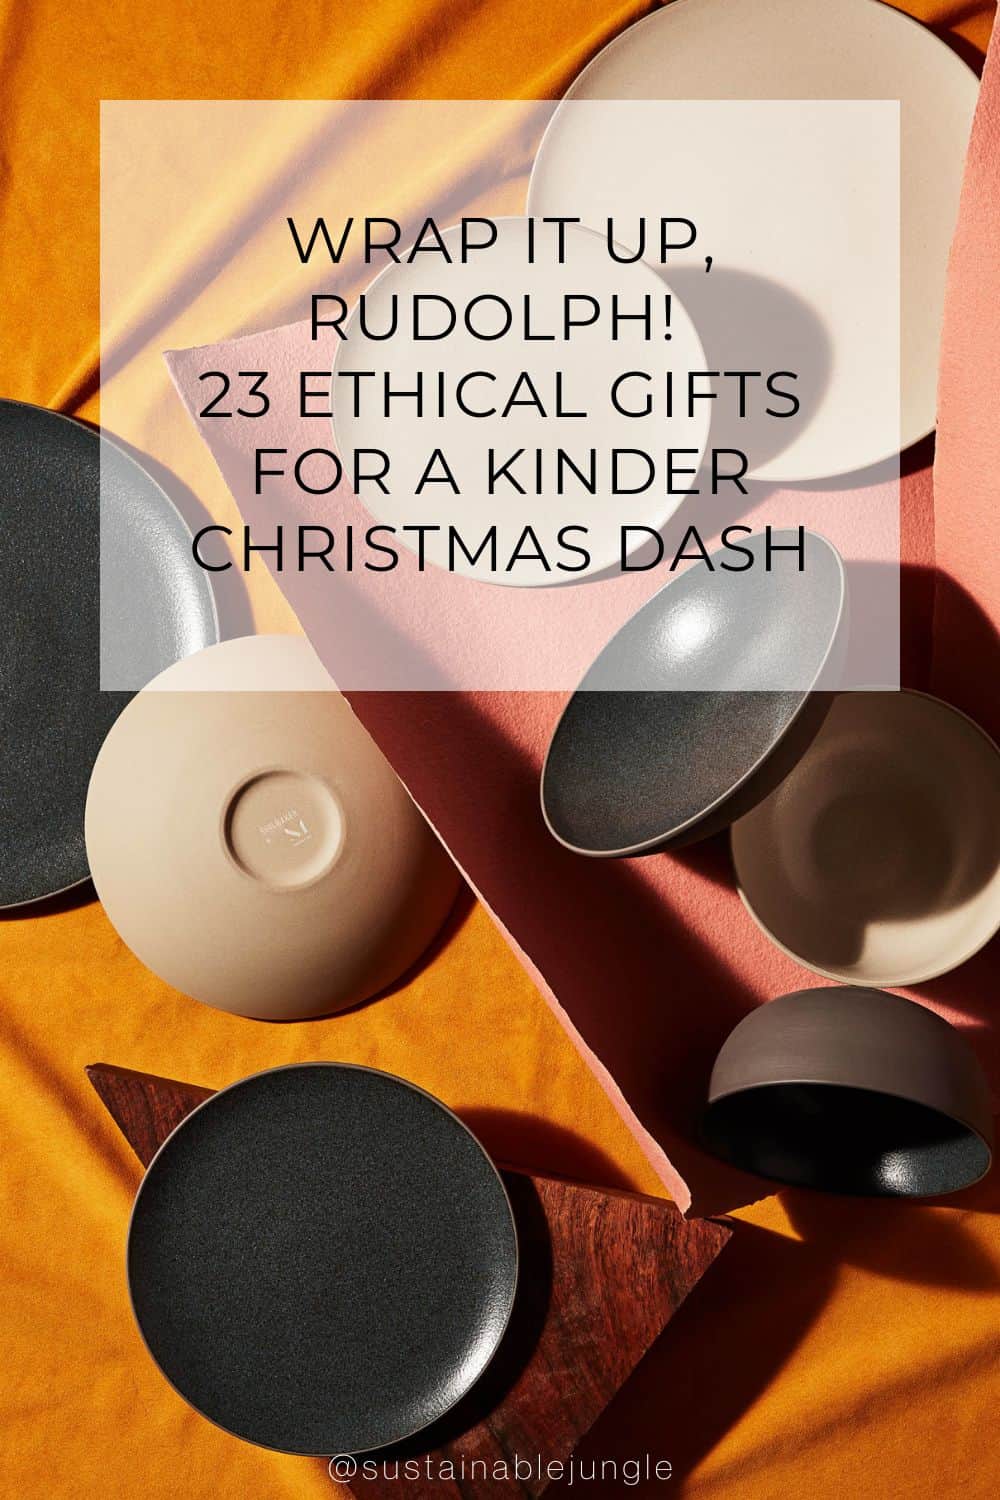 Wrap It Up, Rudolph! 23 Ethical Gifts For A Kinder Christmas Dash Image by Material Kitchen #sustainablestockingstuffers #bestsustainablestockingstufferideas #ecofriendlystockingstuffers #ecofriendlystockingstufferideas #practicalstockingstuffers #sustainablejungle